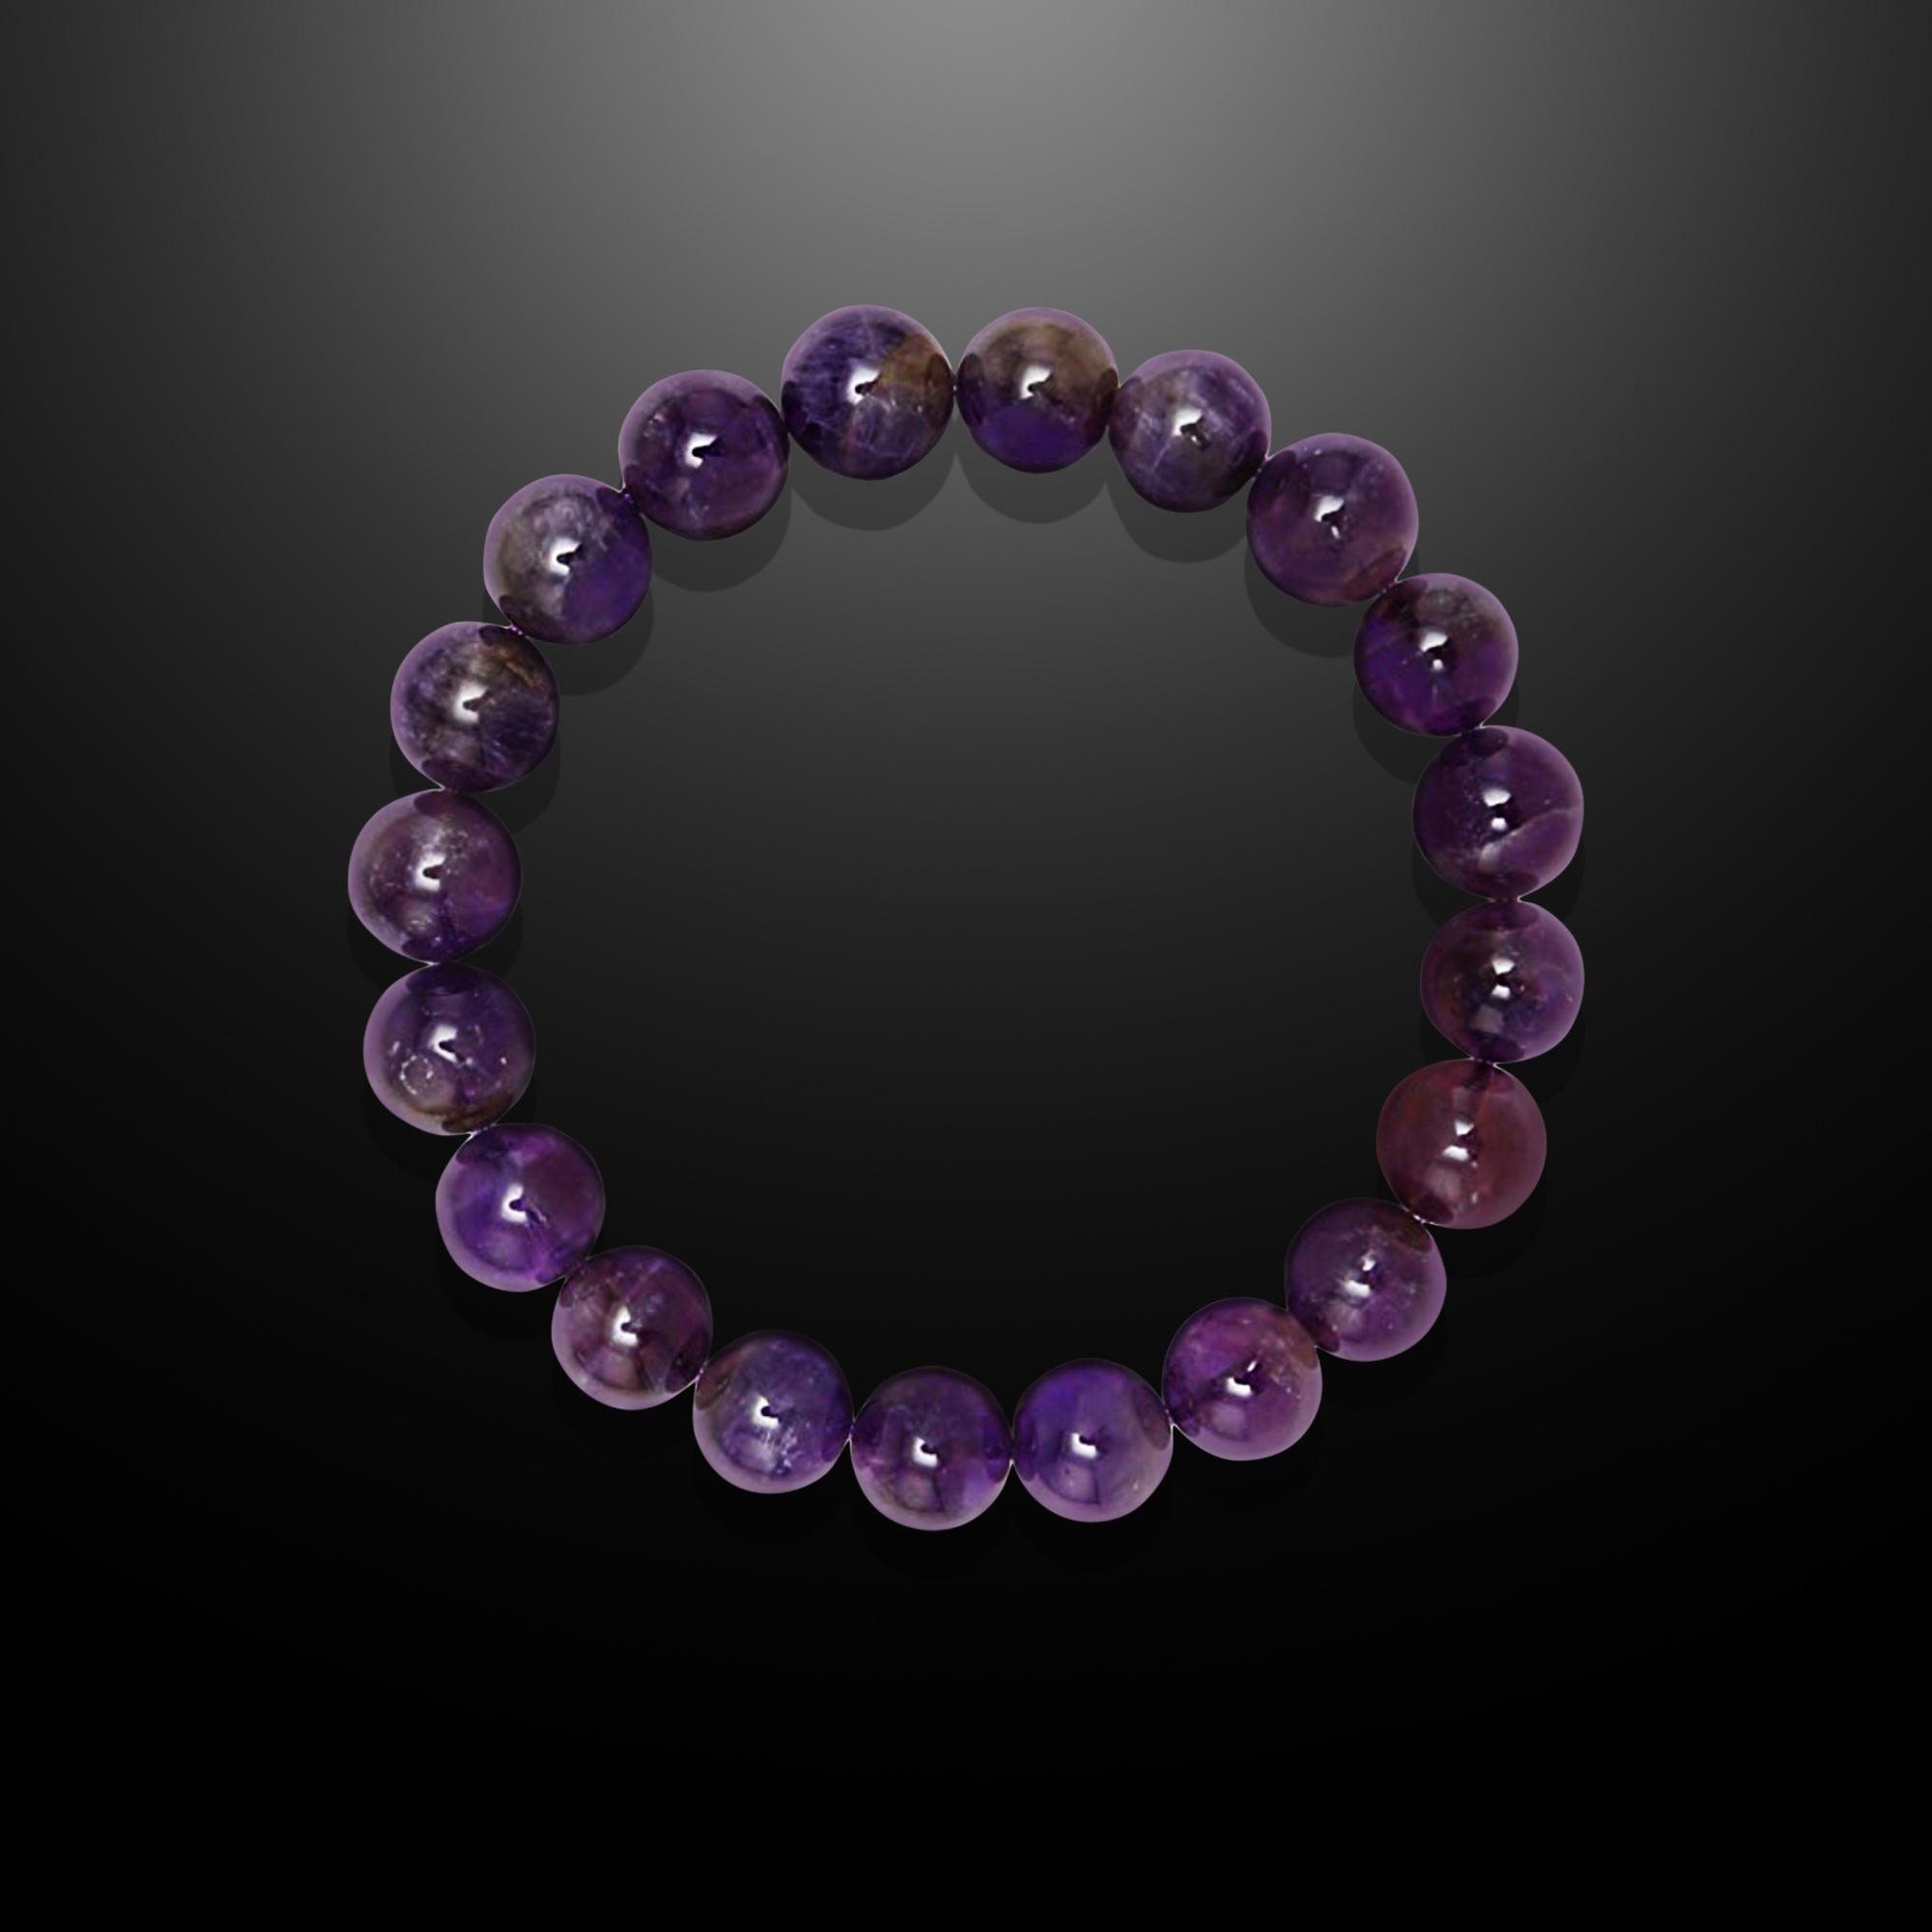 Harmonious Amethyst Necklace for Everyone - Style & Serenity | Luck Strings